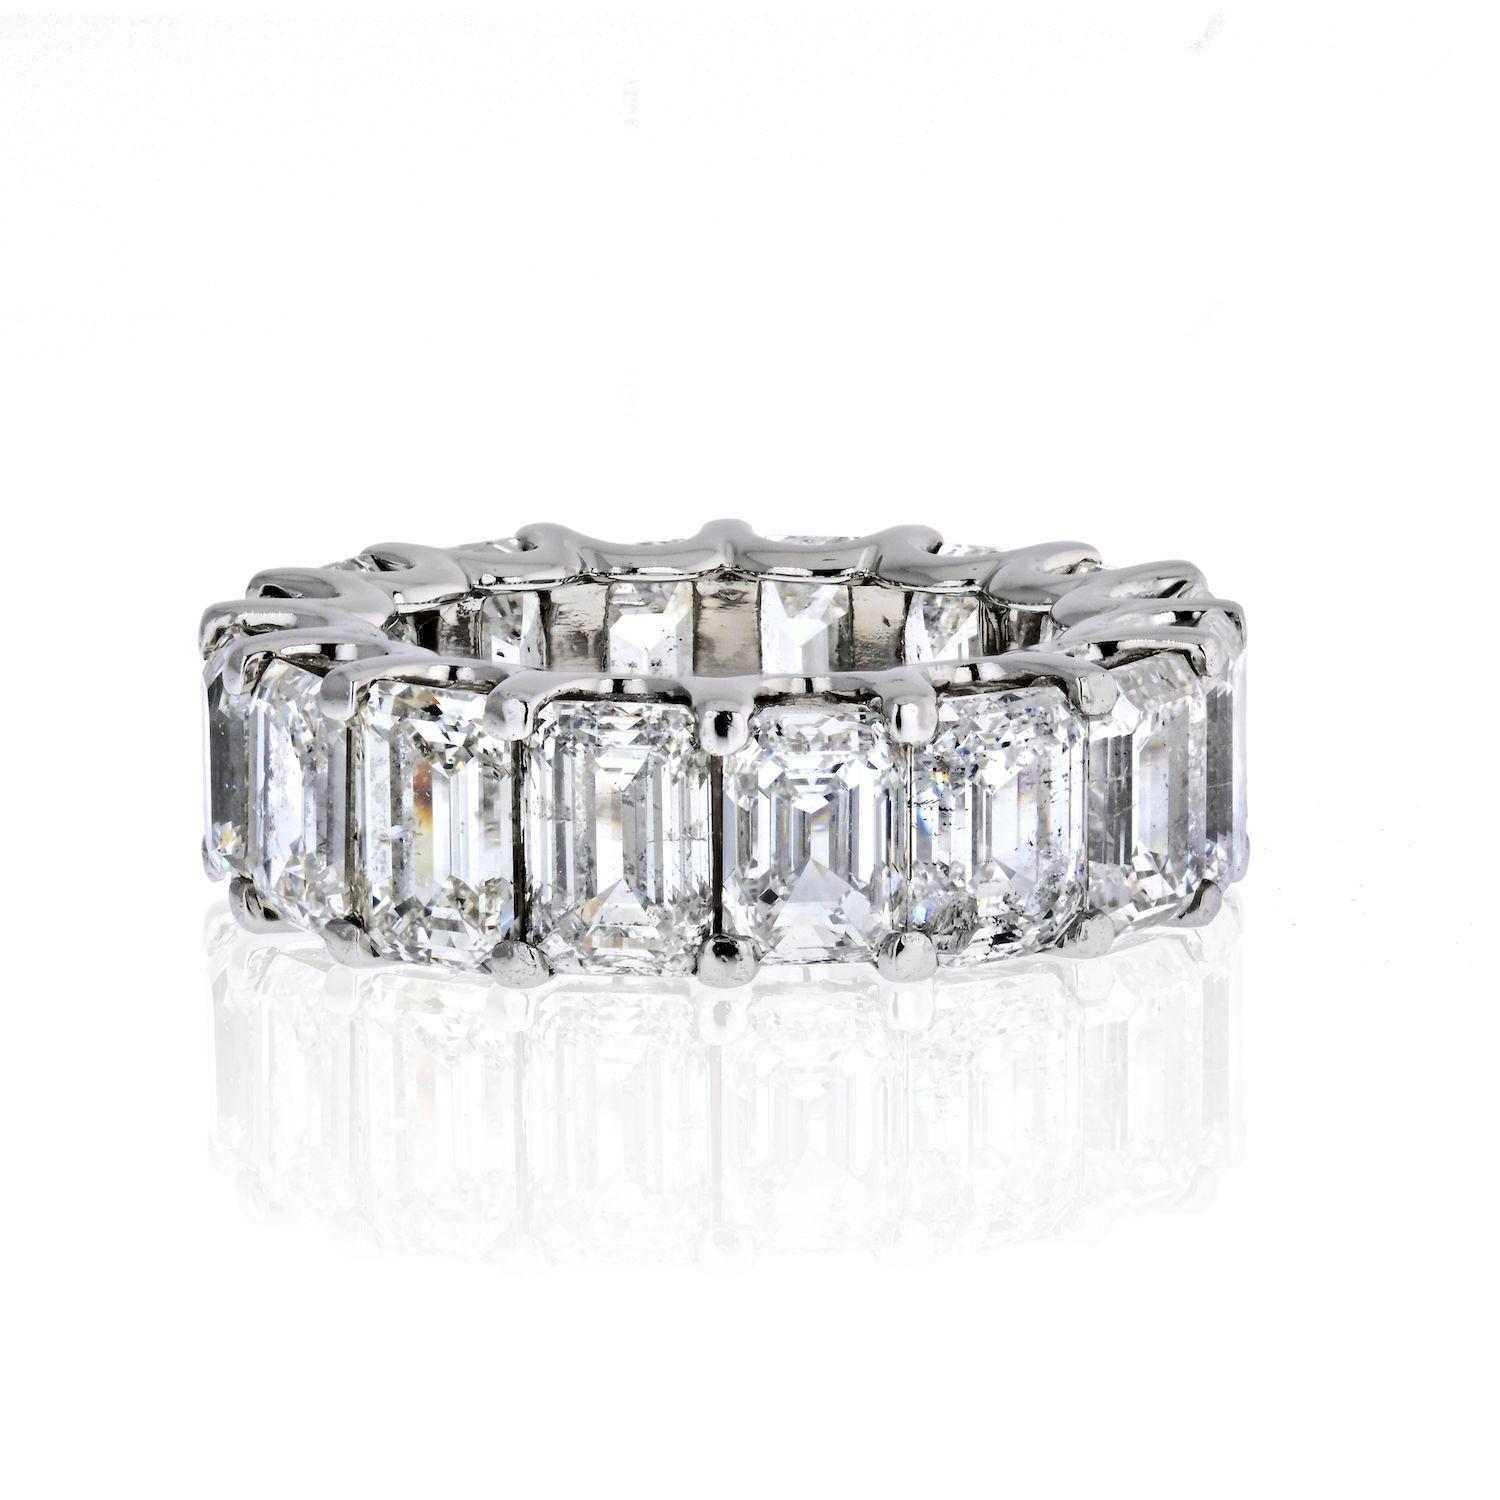 A sparkling array of brilliance is created by emerald cut diamonds that total 16.24 carats. These diamonds go all the way around the band, so even if the ring twist, there will always be diamonds showing.
Diamond Carat Weight: 16.24cts;
Diamond